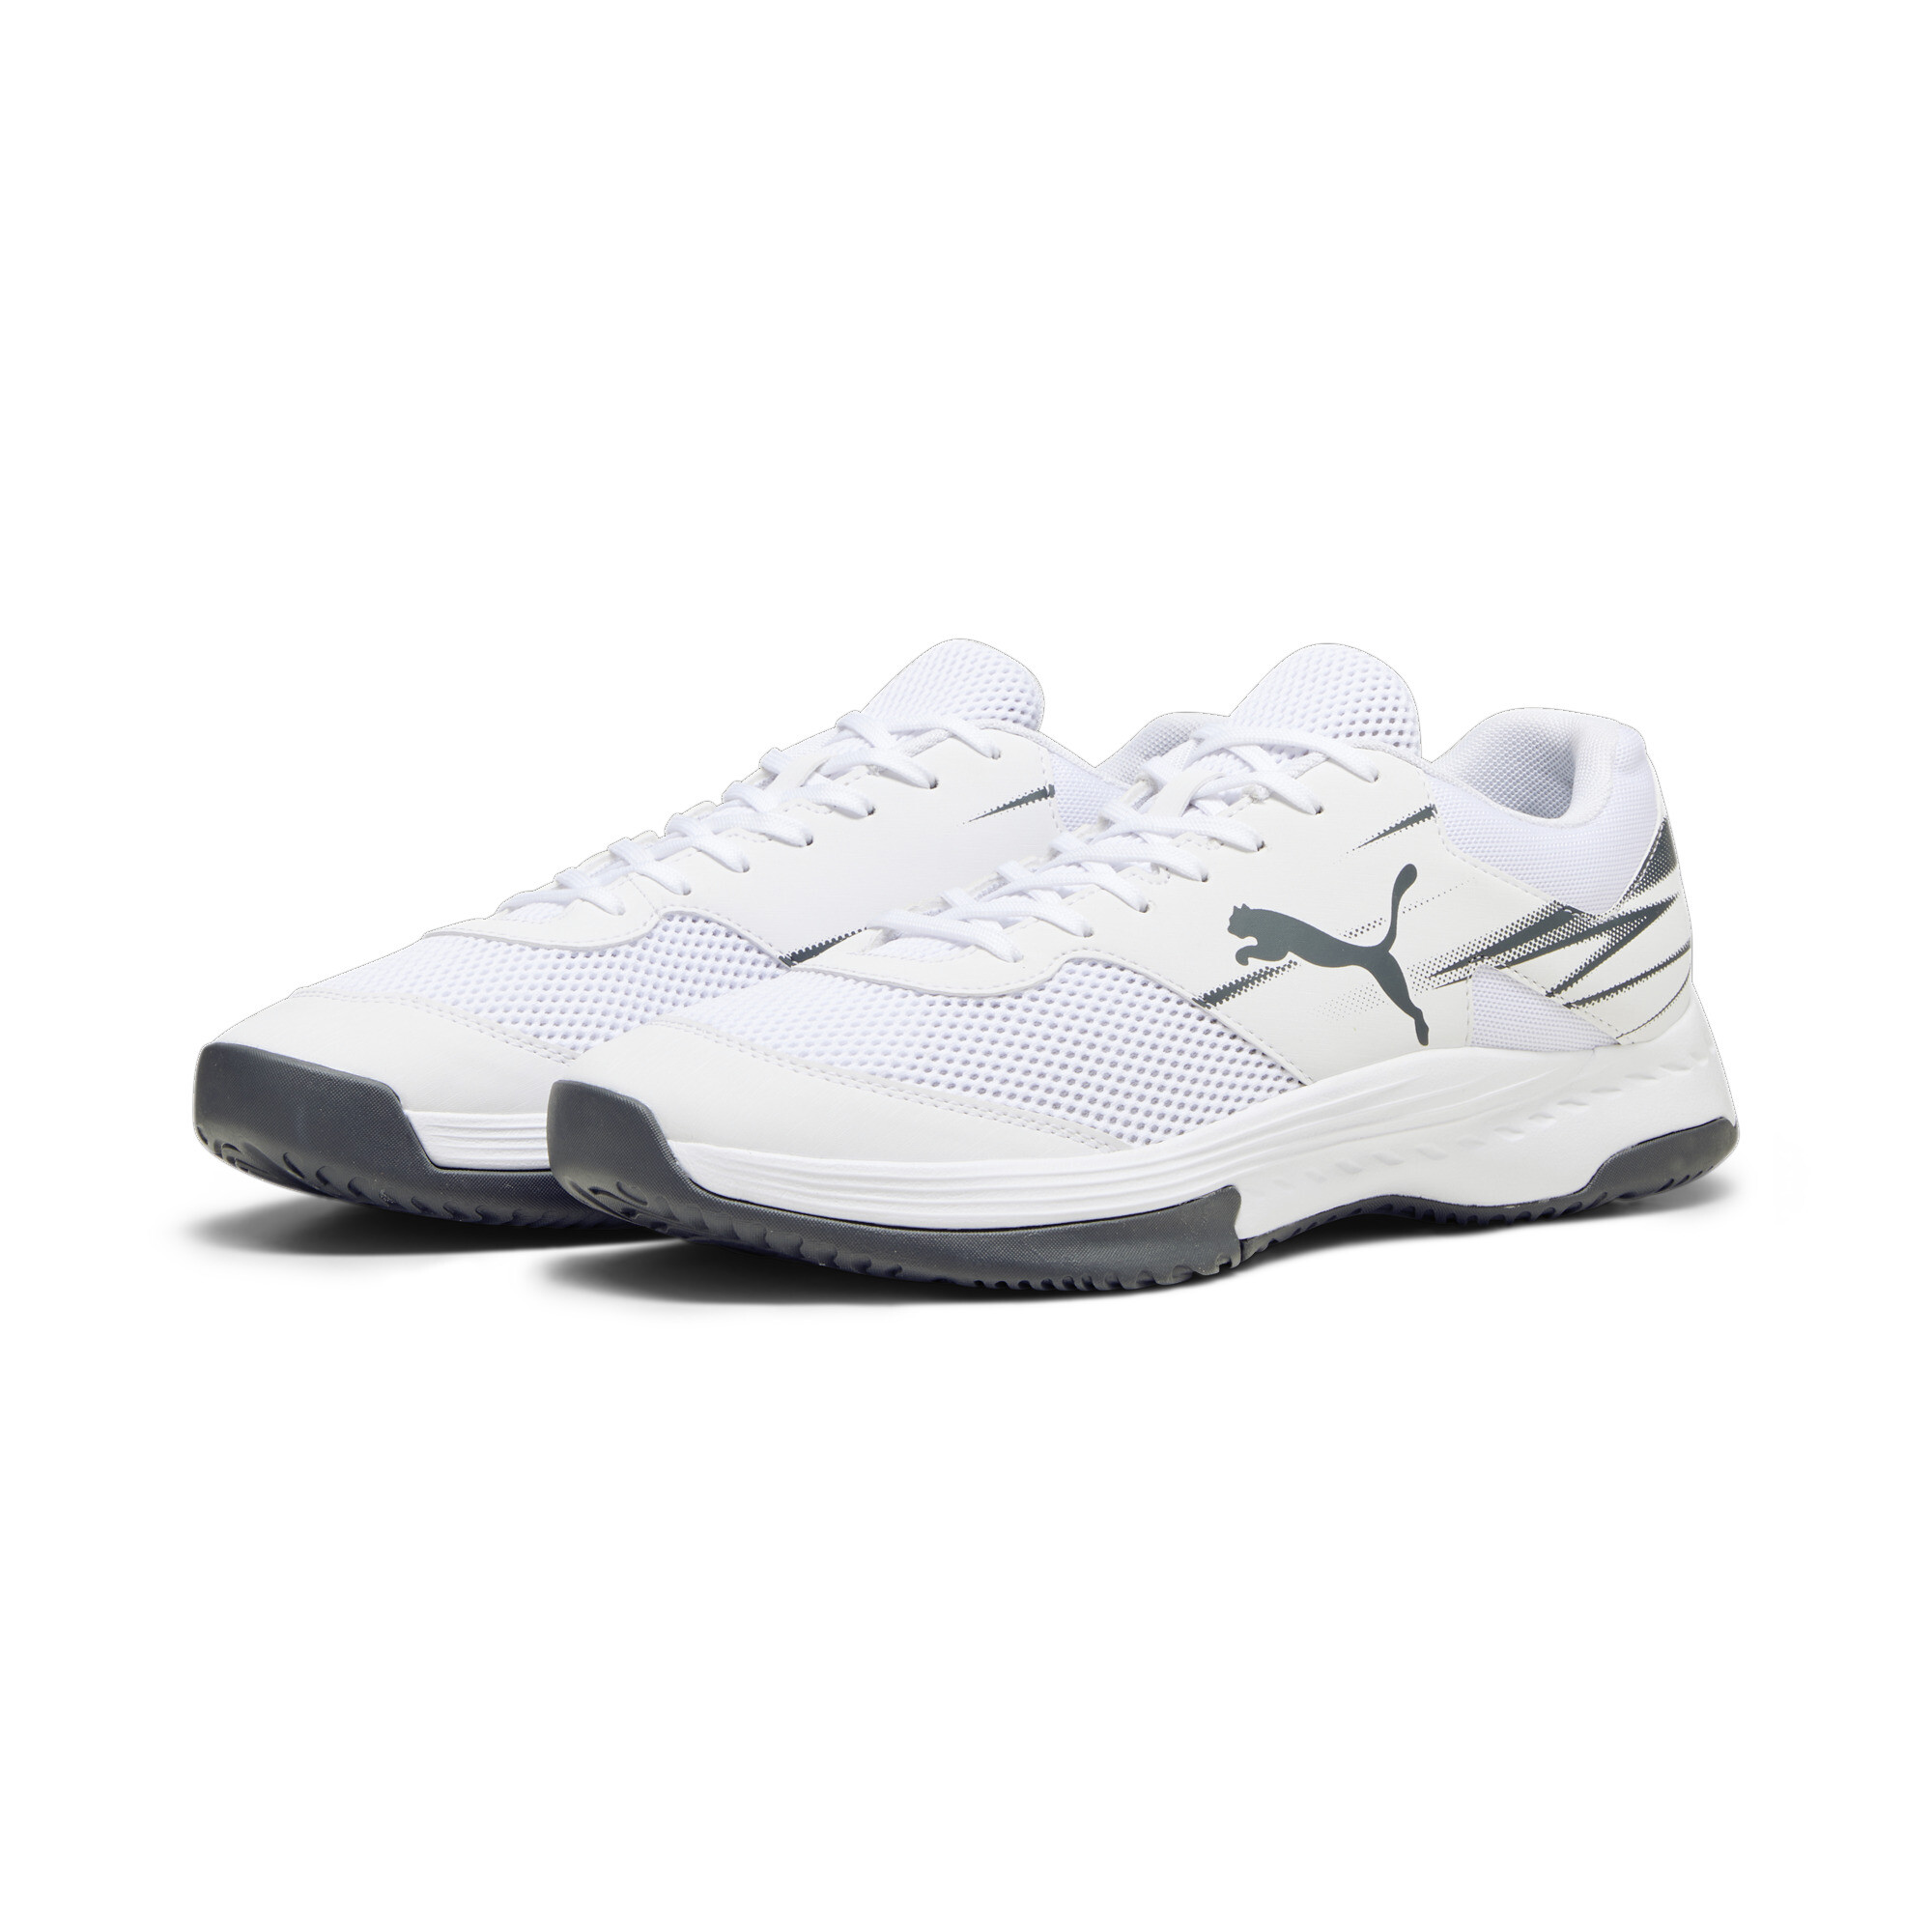 Puma Varion II Indoor Sports Shoes, White, Size 45, Shoes